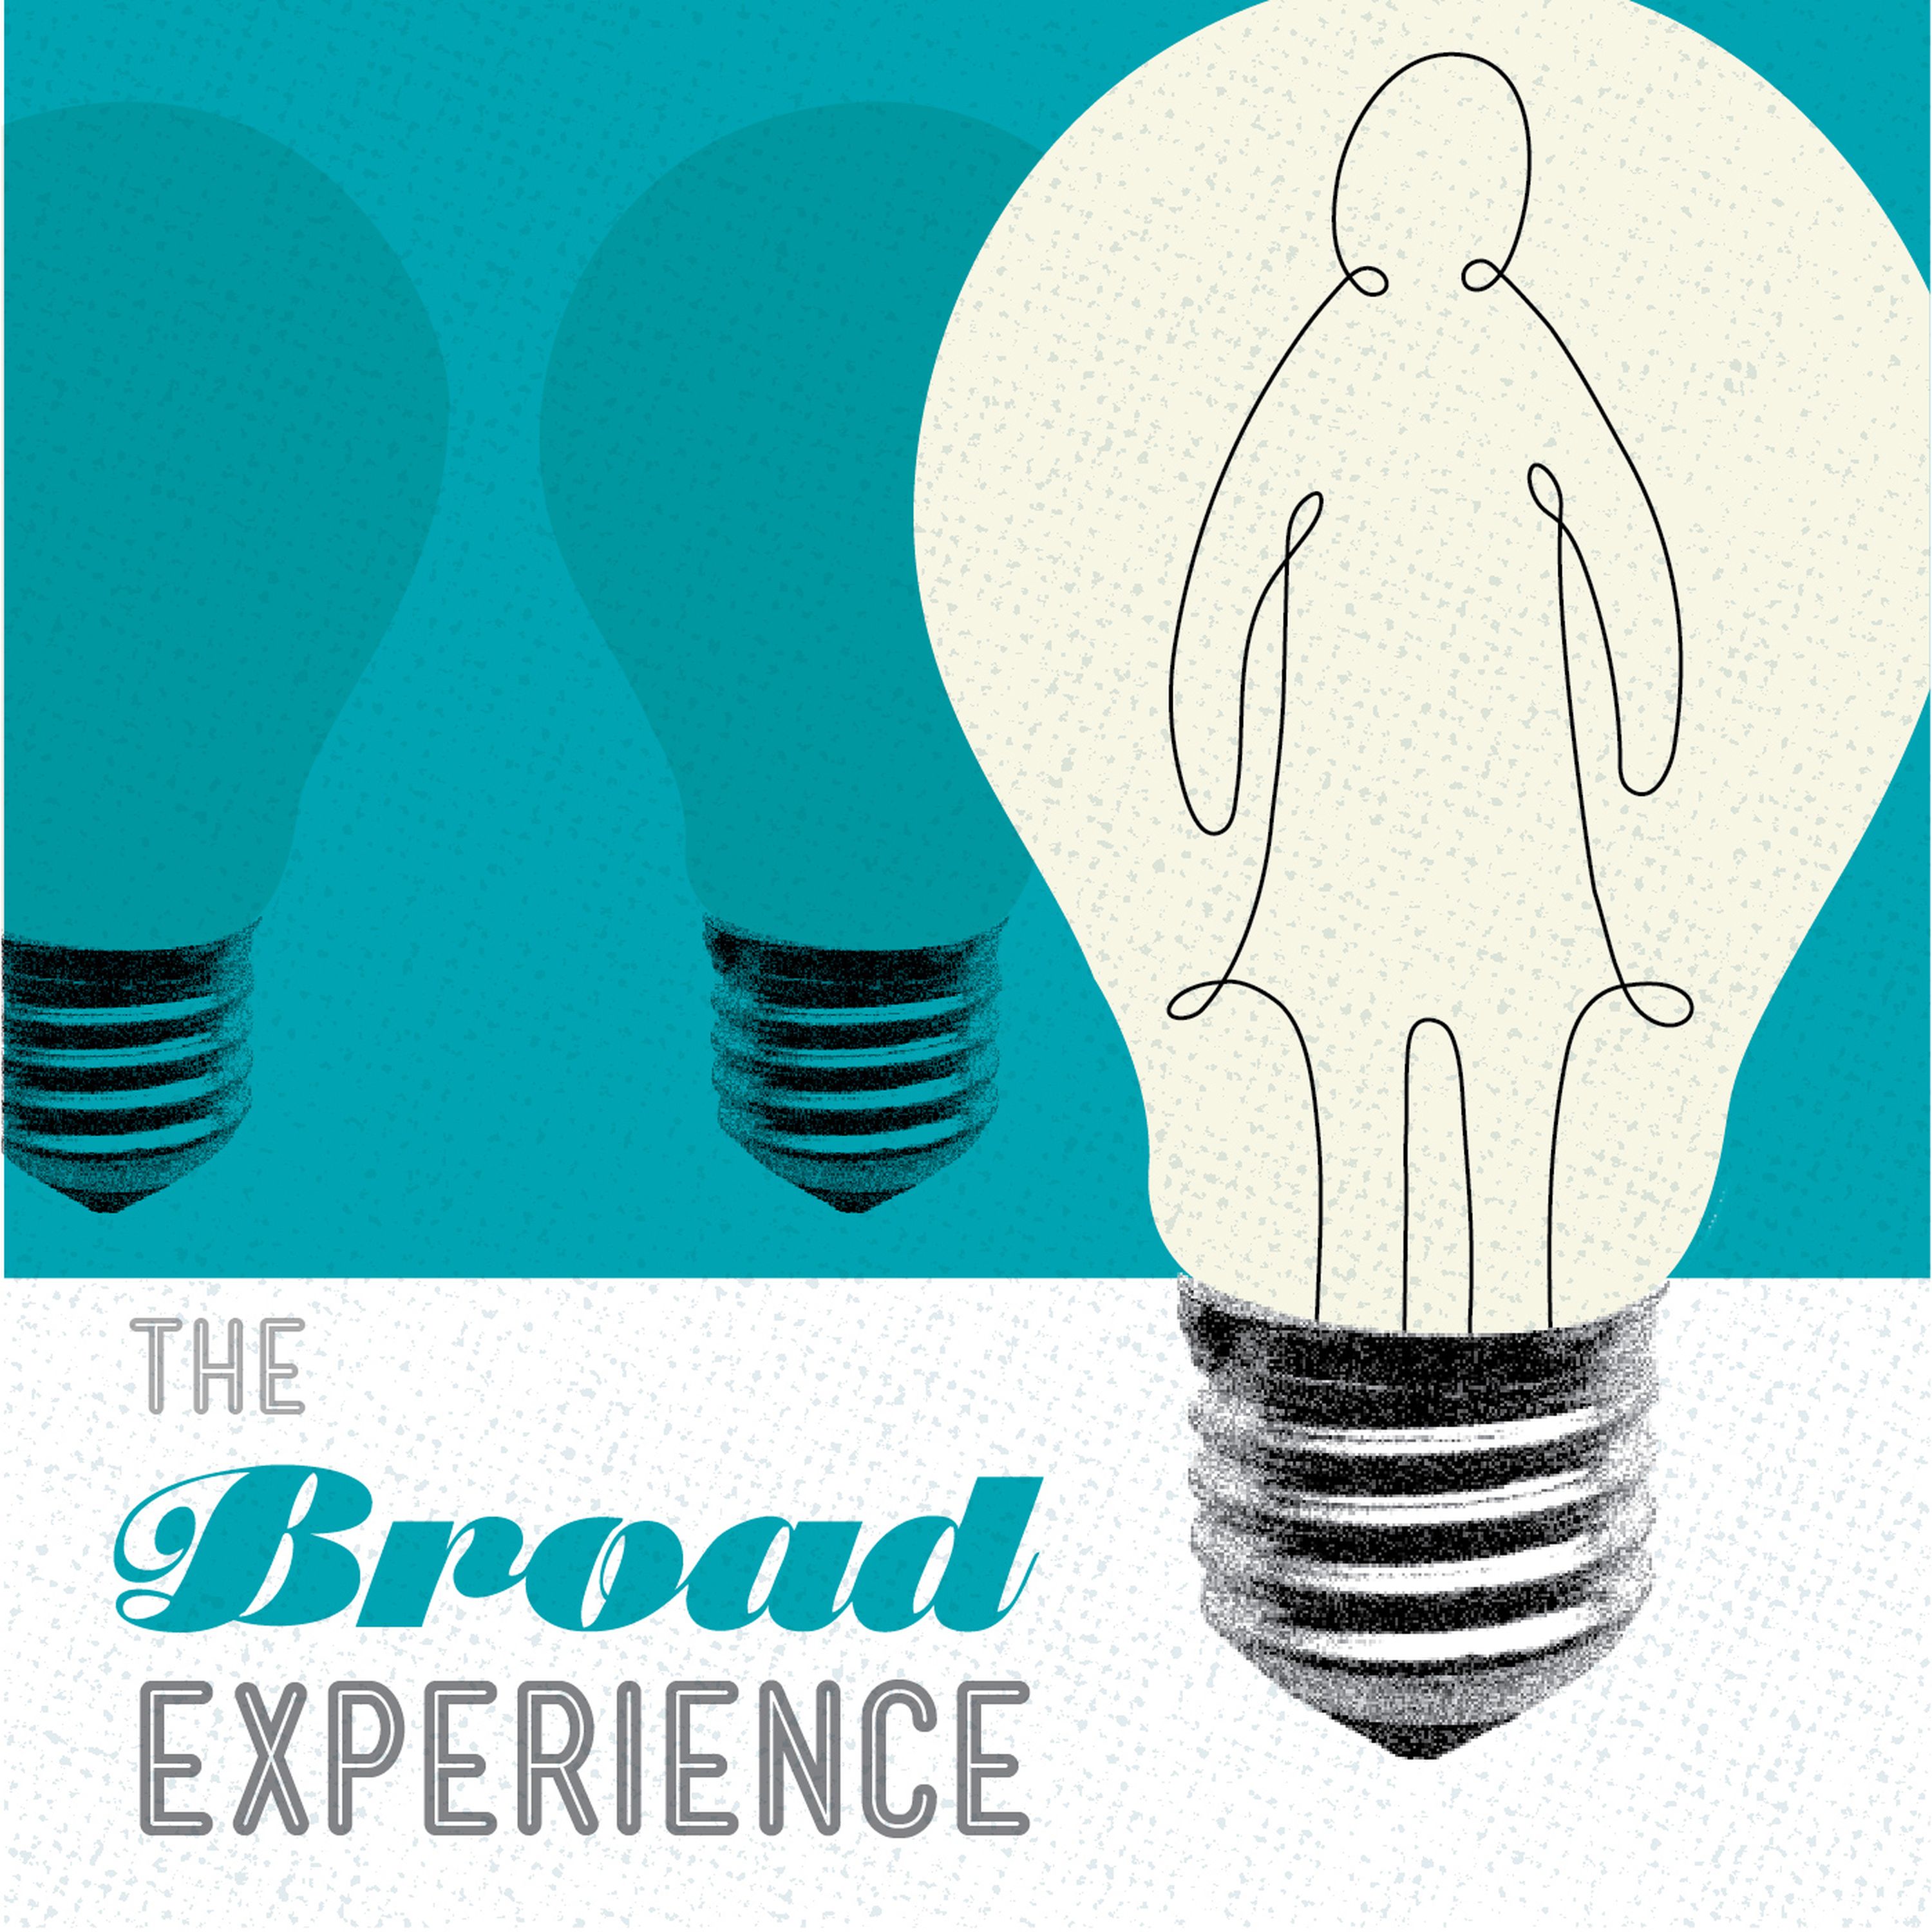 The Broad Experience 38: Women, work, and sex (re-release)